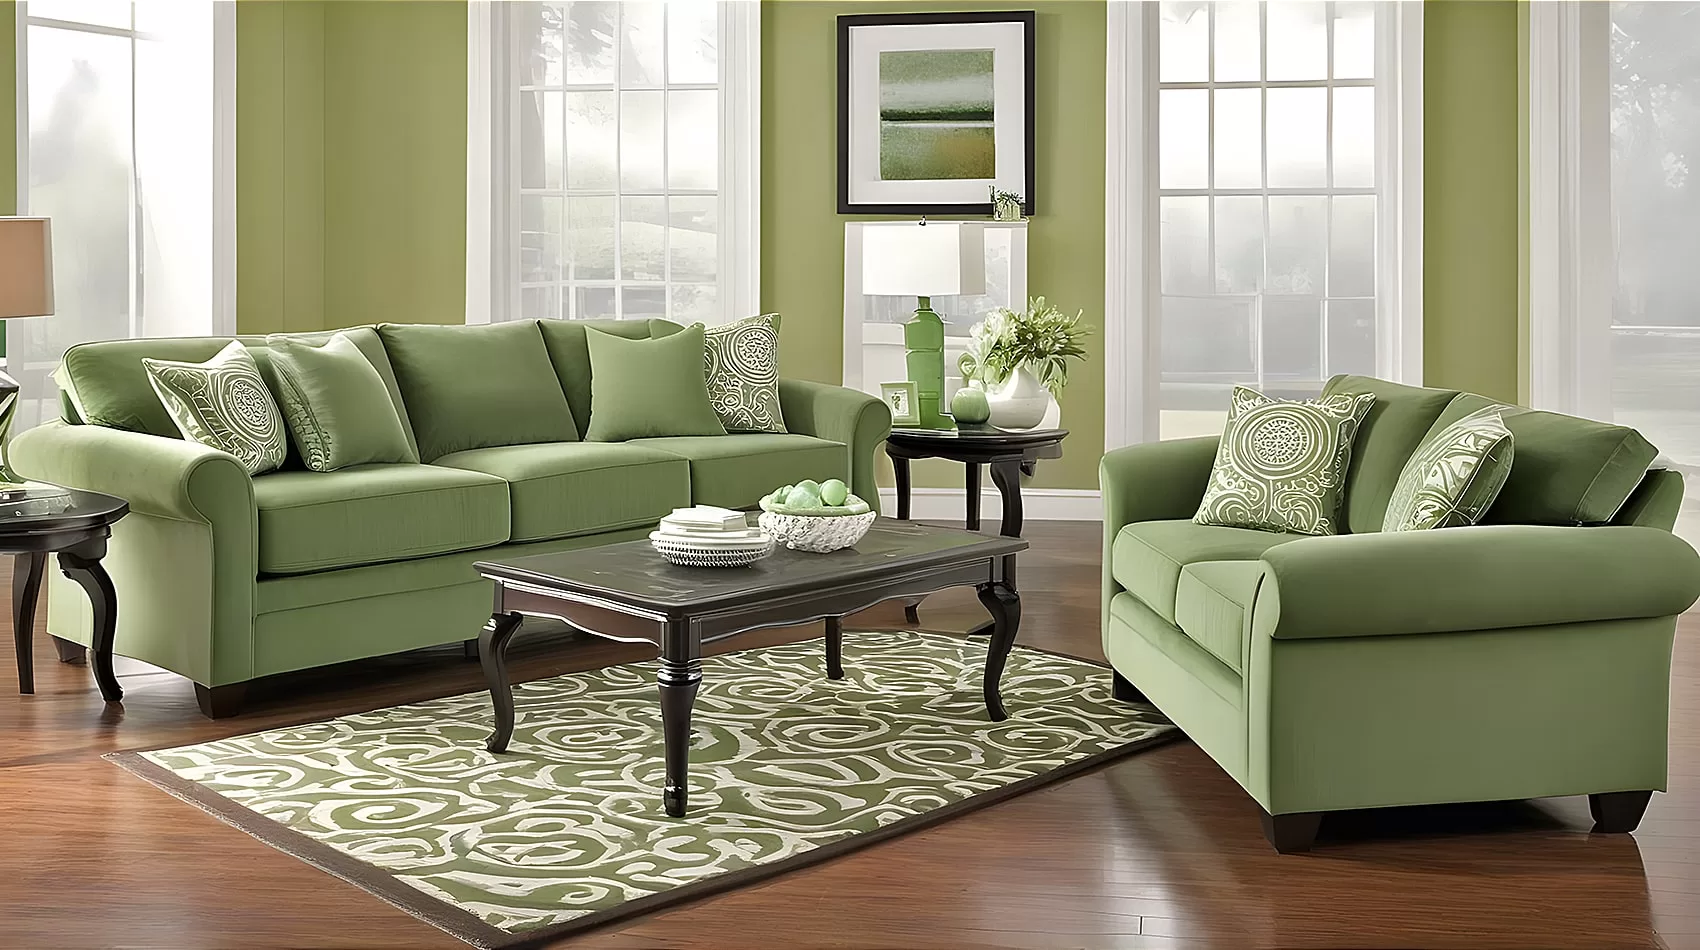 The Sage Green Couch: A Tranquil Touch to Your Living Space